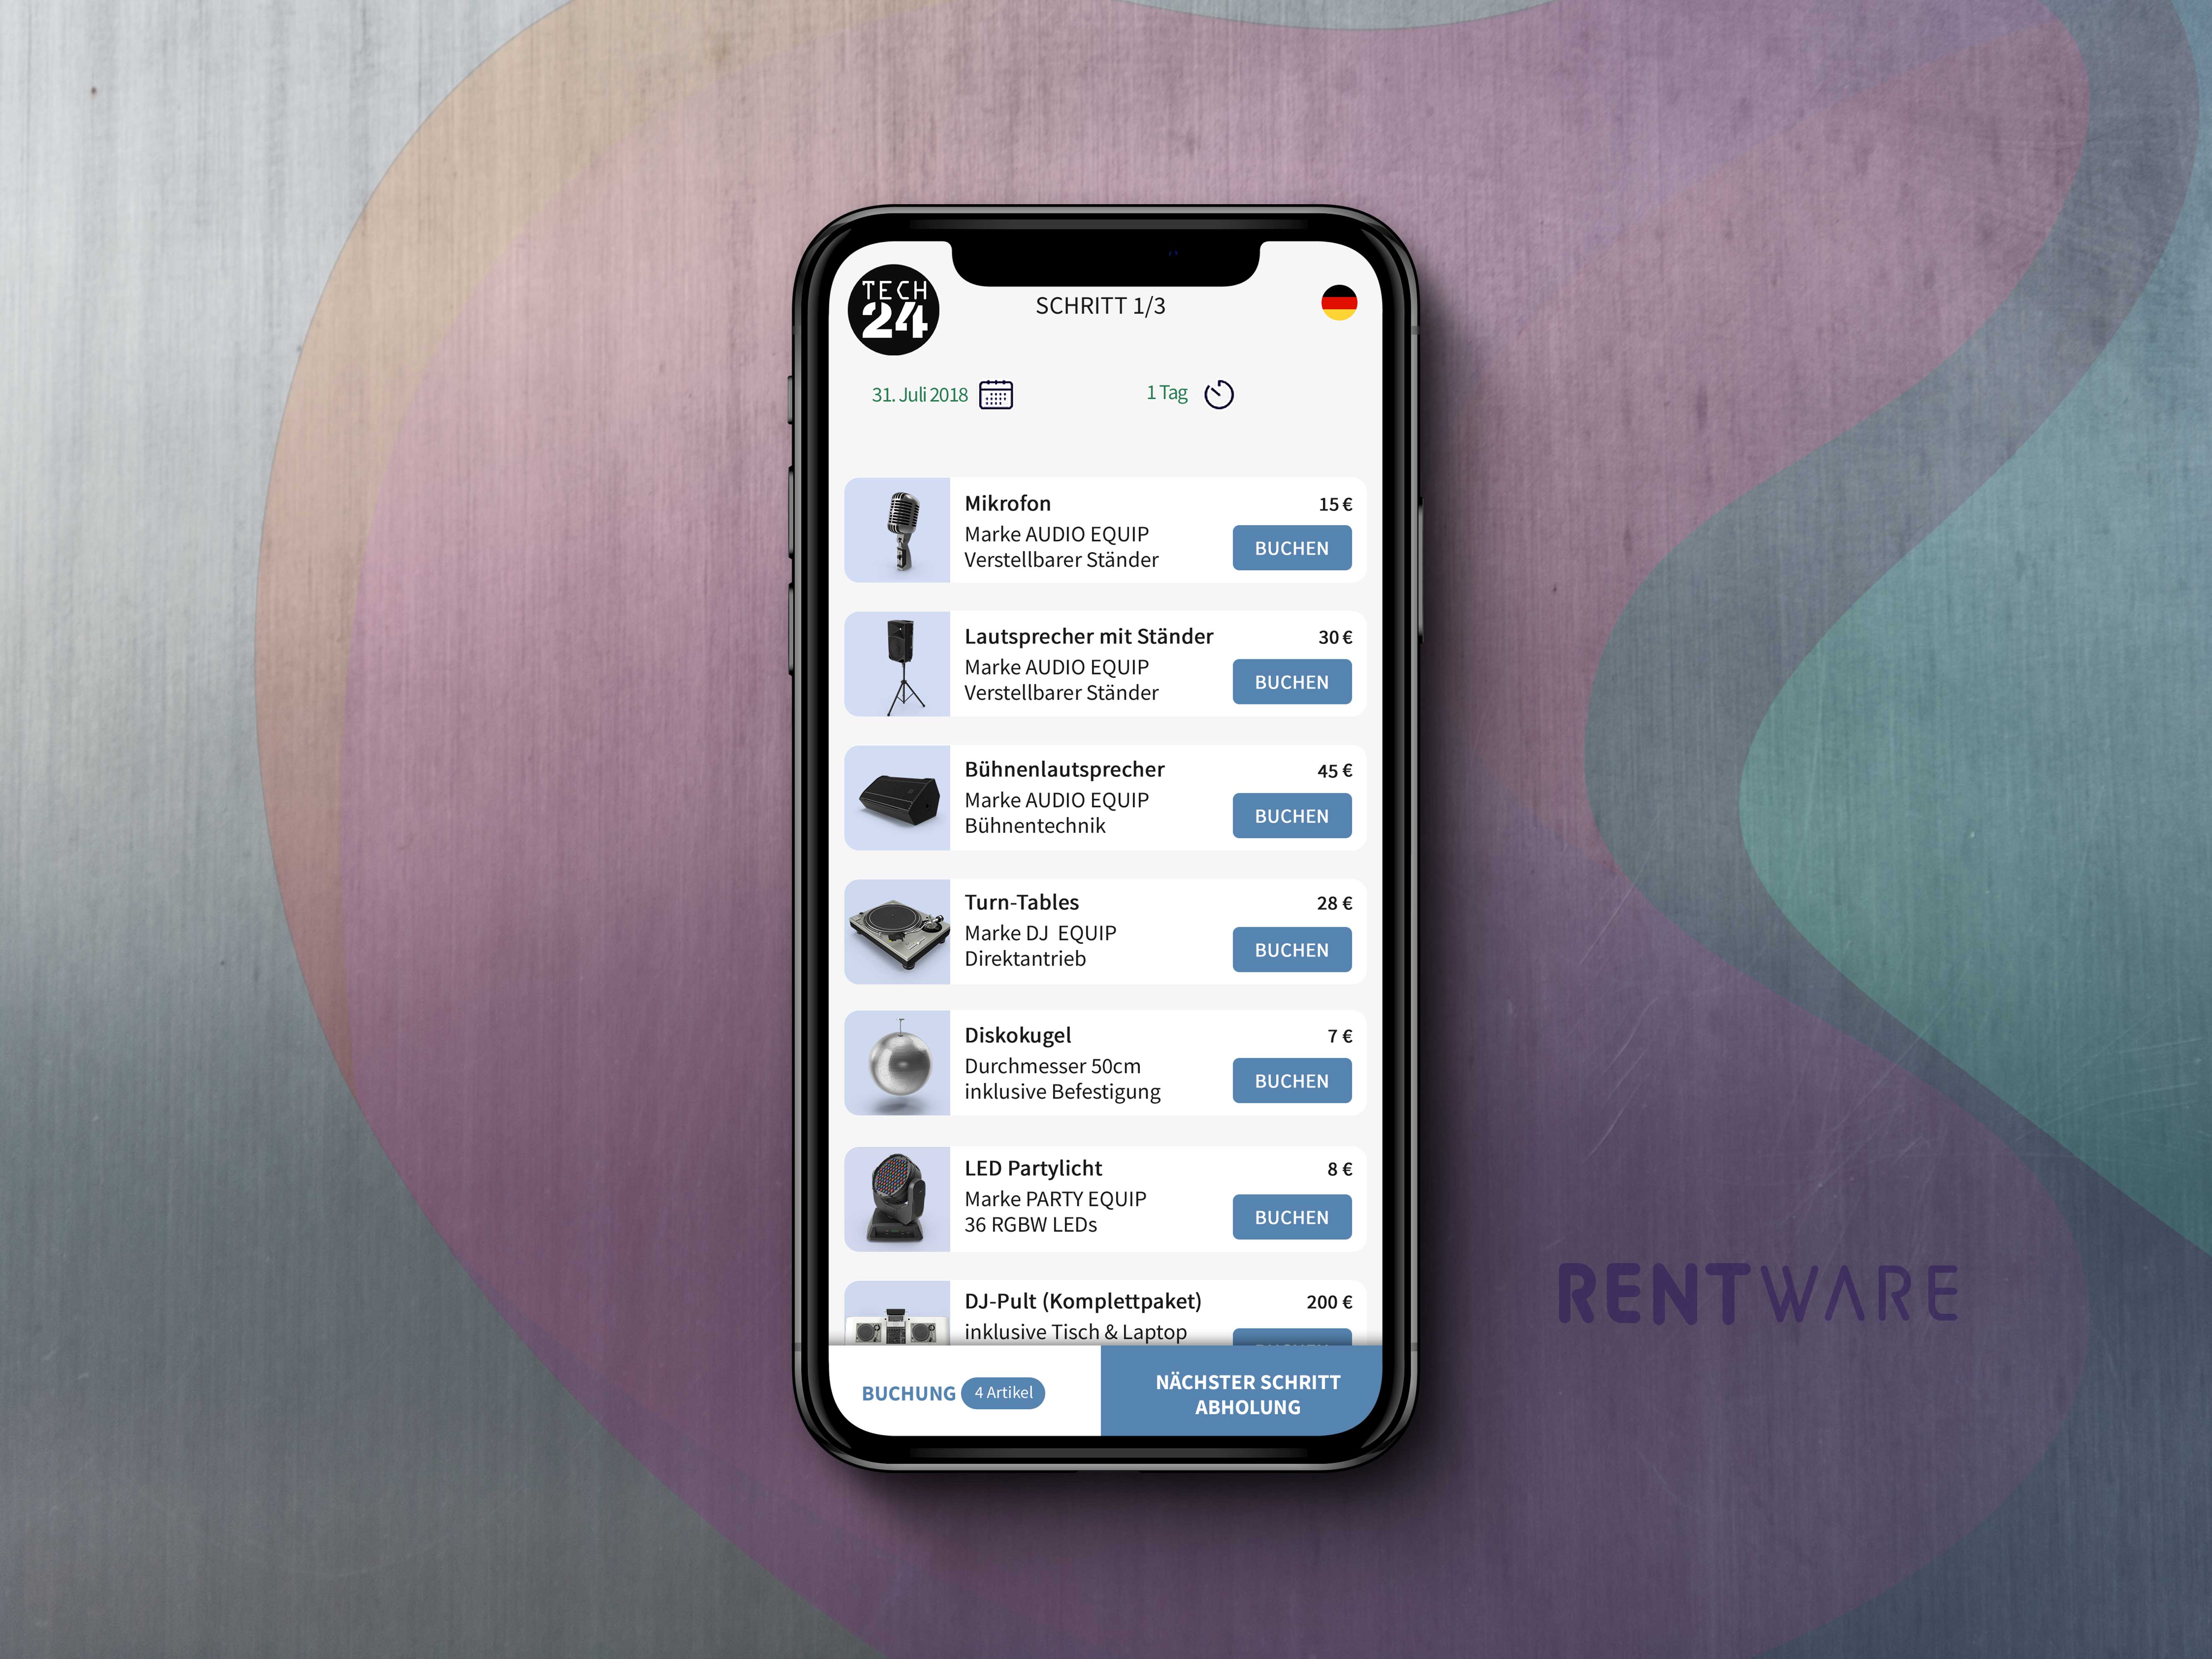 Rentware's mobile interface